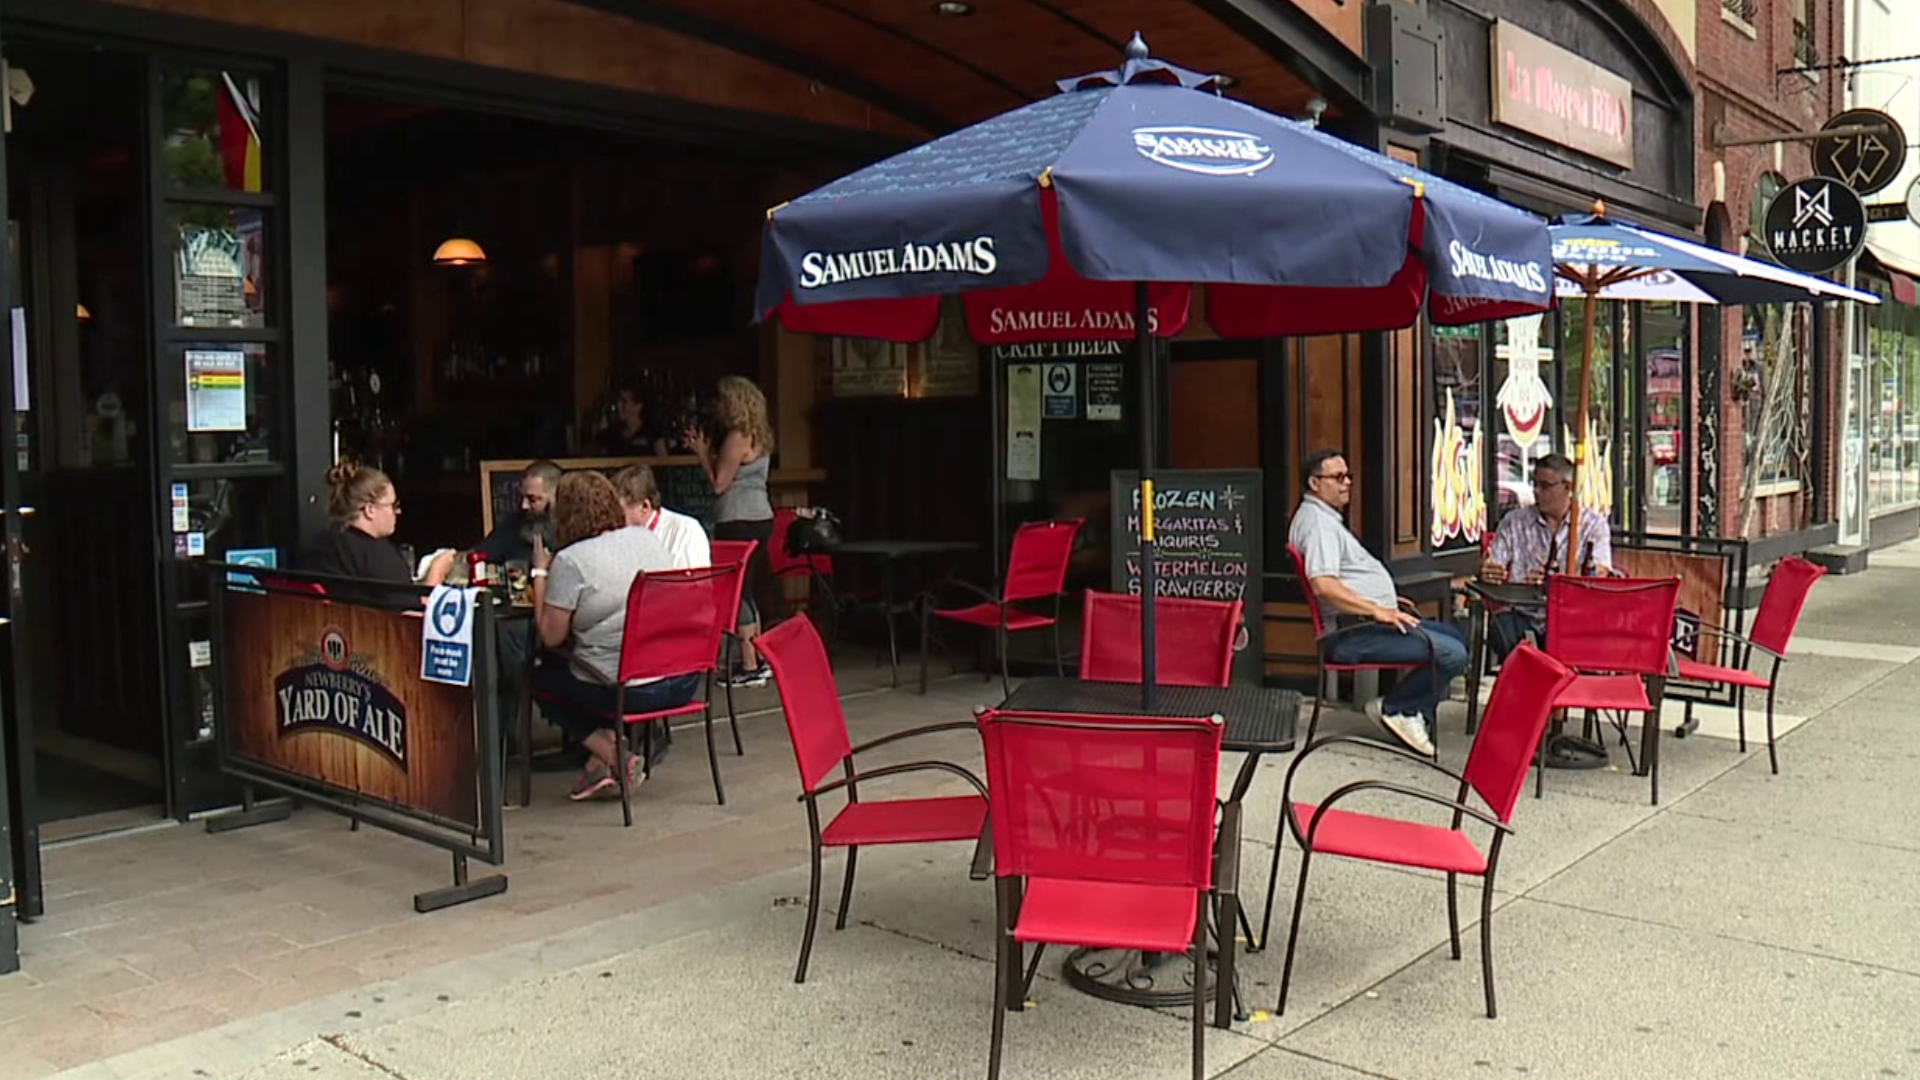 Many restaurants along Main Street have been looking forward to serving their customers.